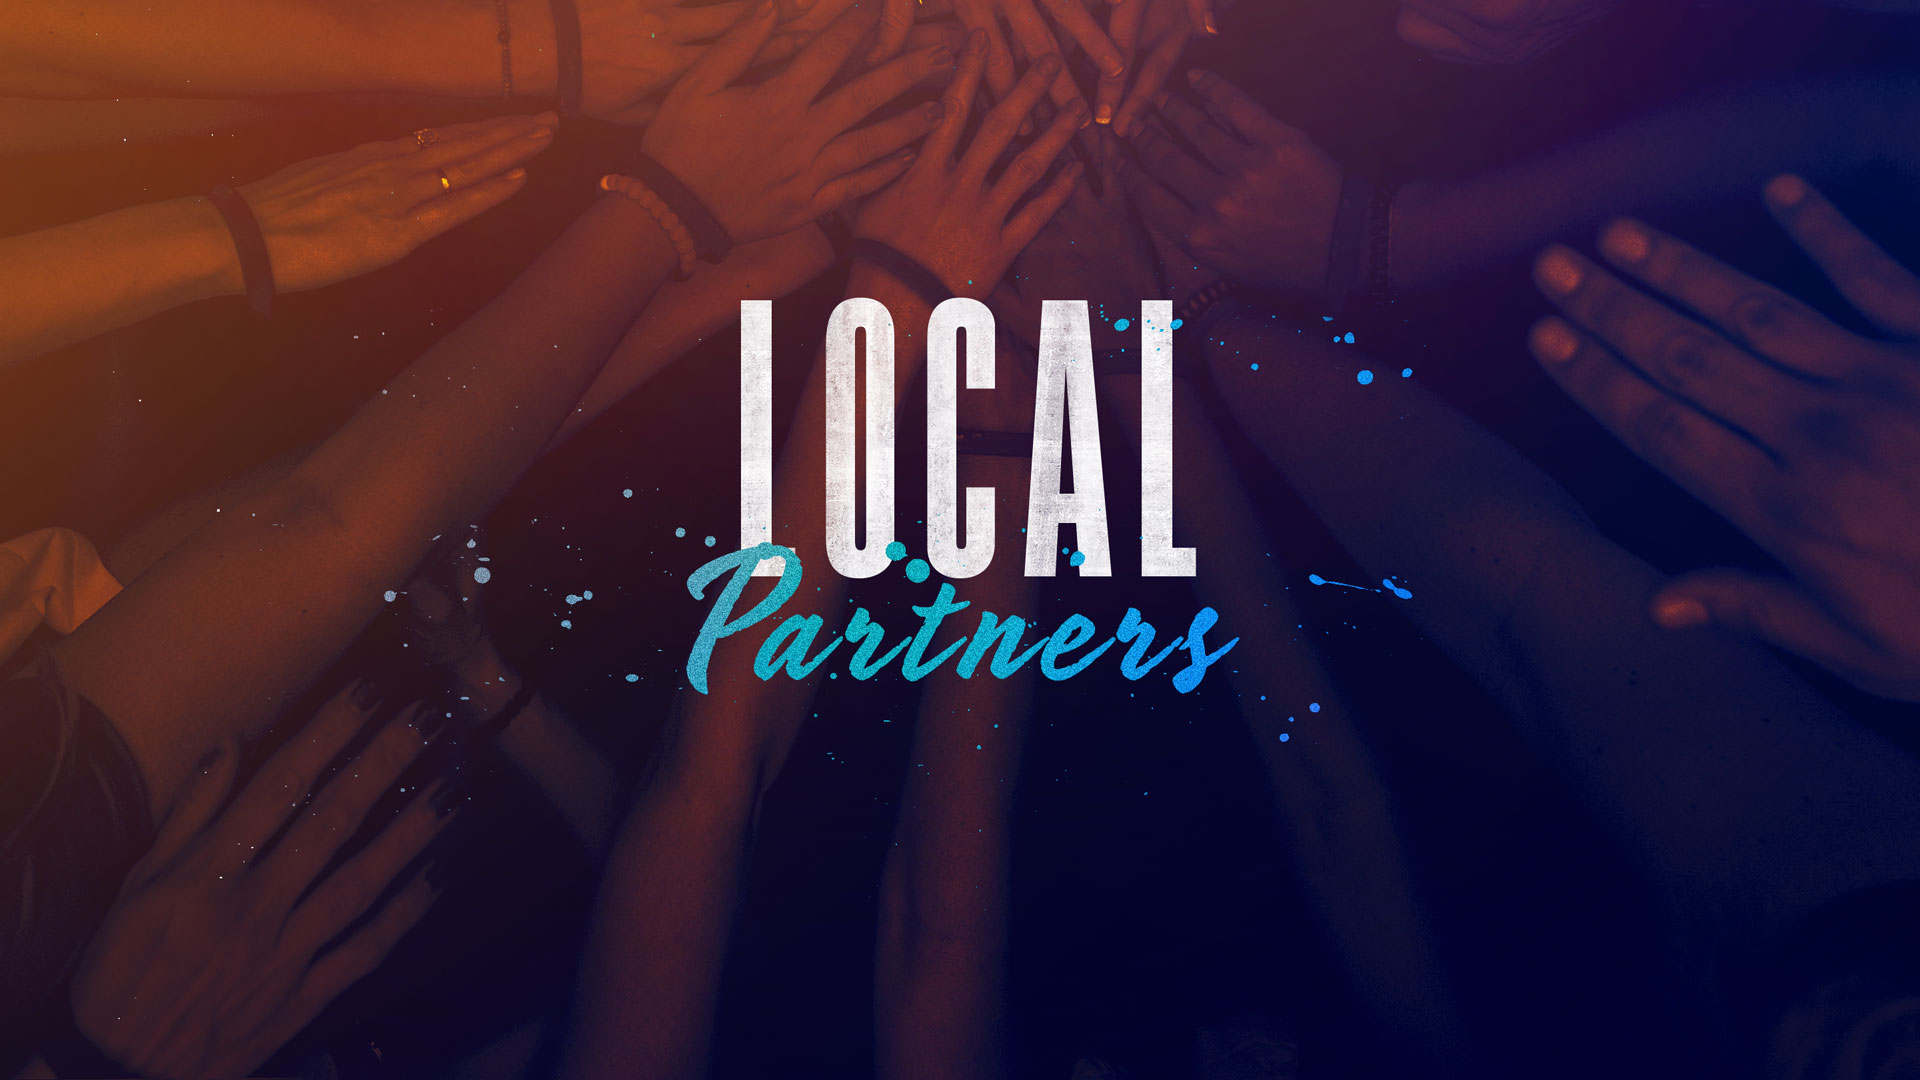 Local Partners